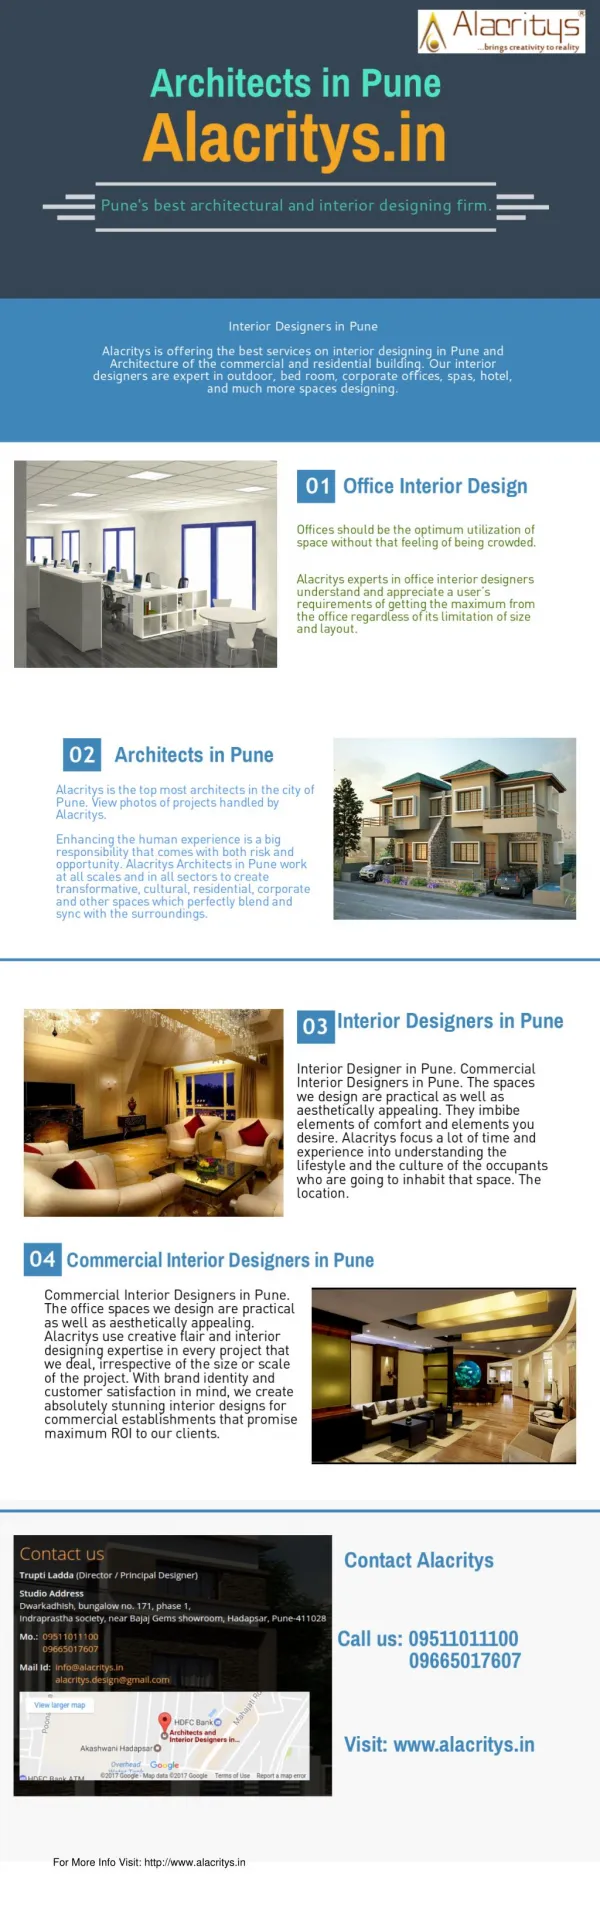 Hire the Best Architects in Pune form Alacritys.in